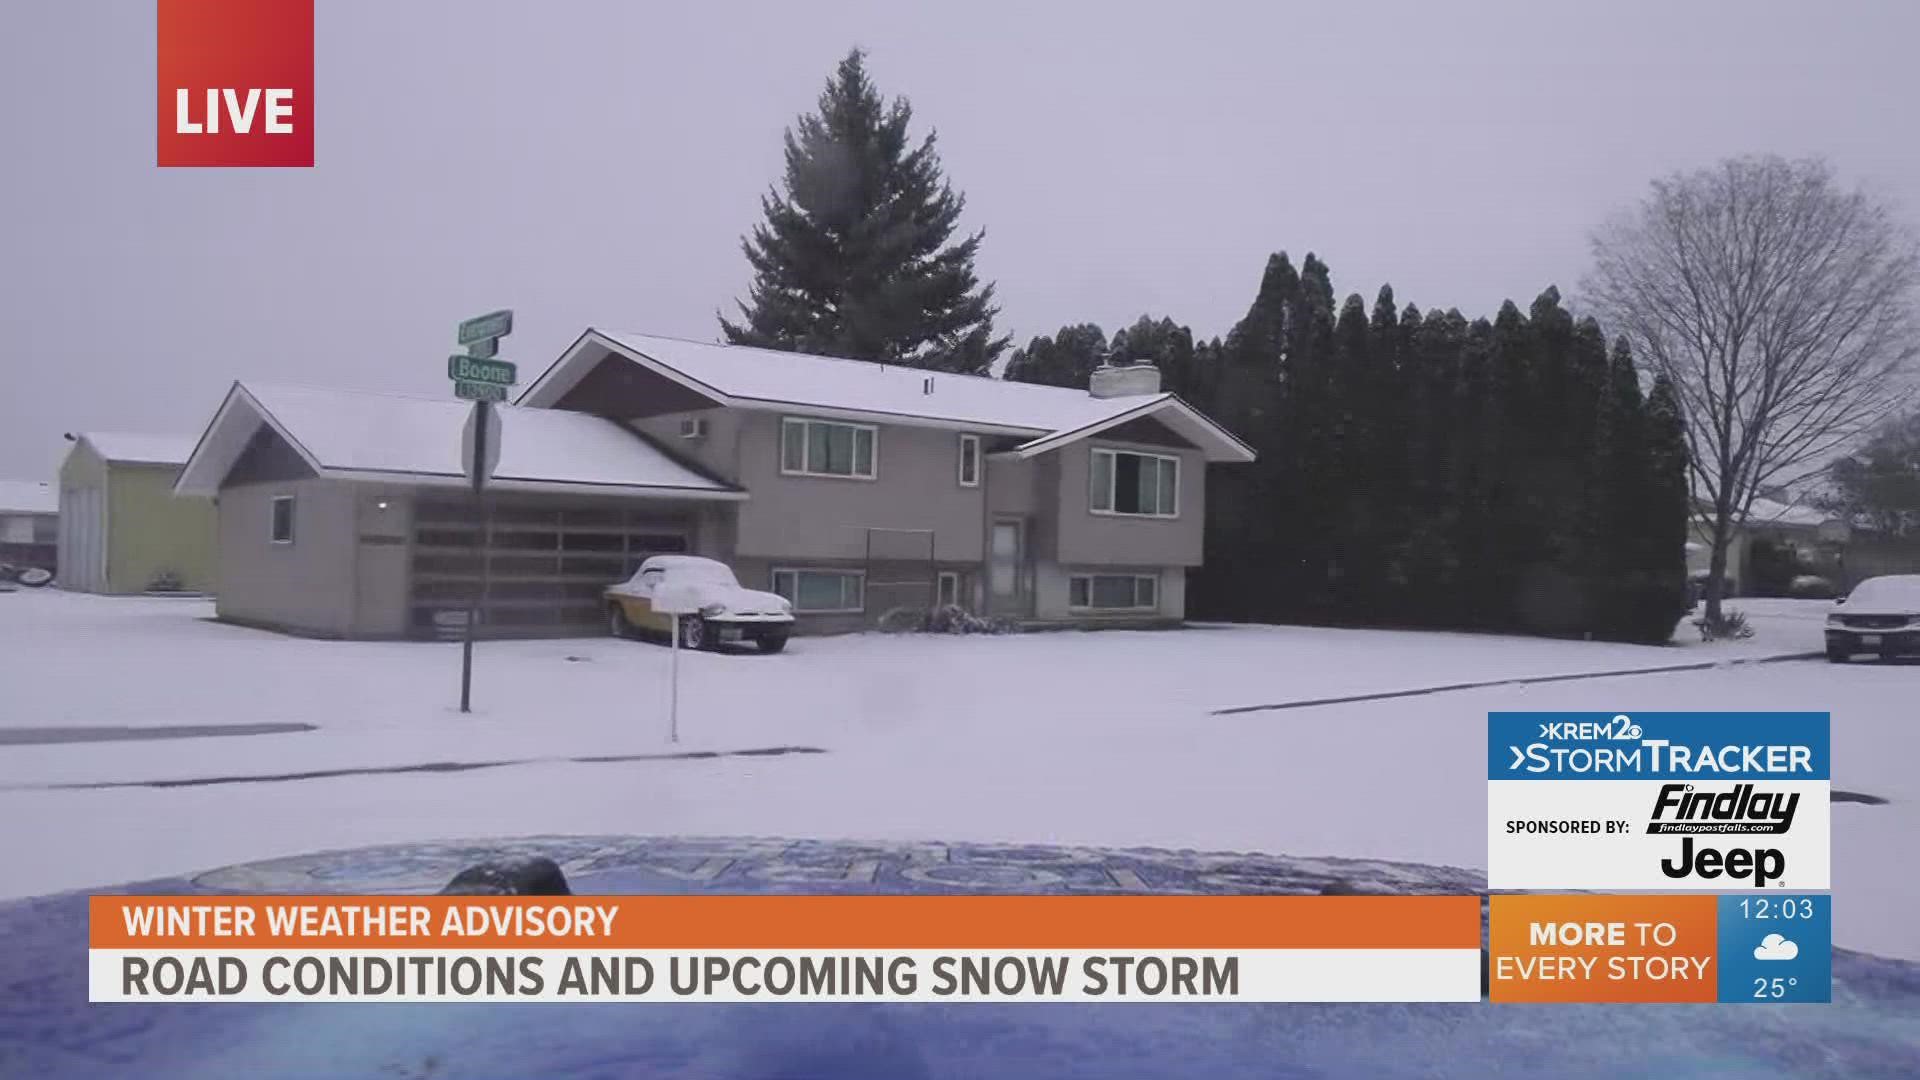 Drivers face some slick road conditions as snow falls in the Spokane area on Monday.